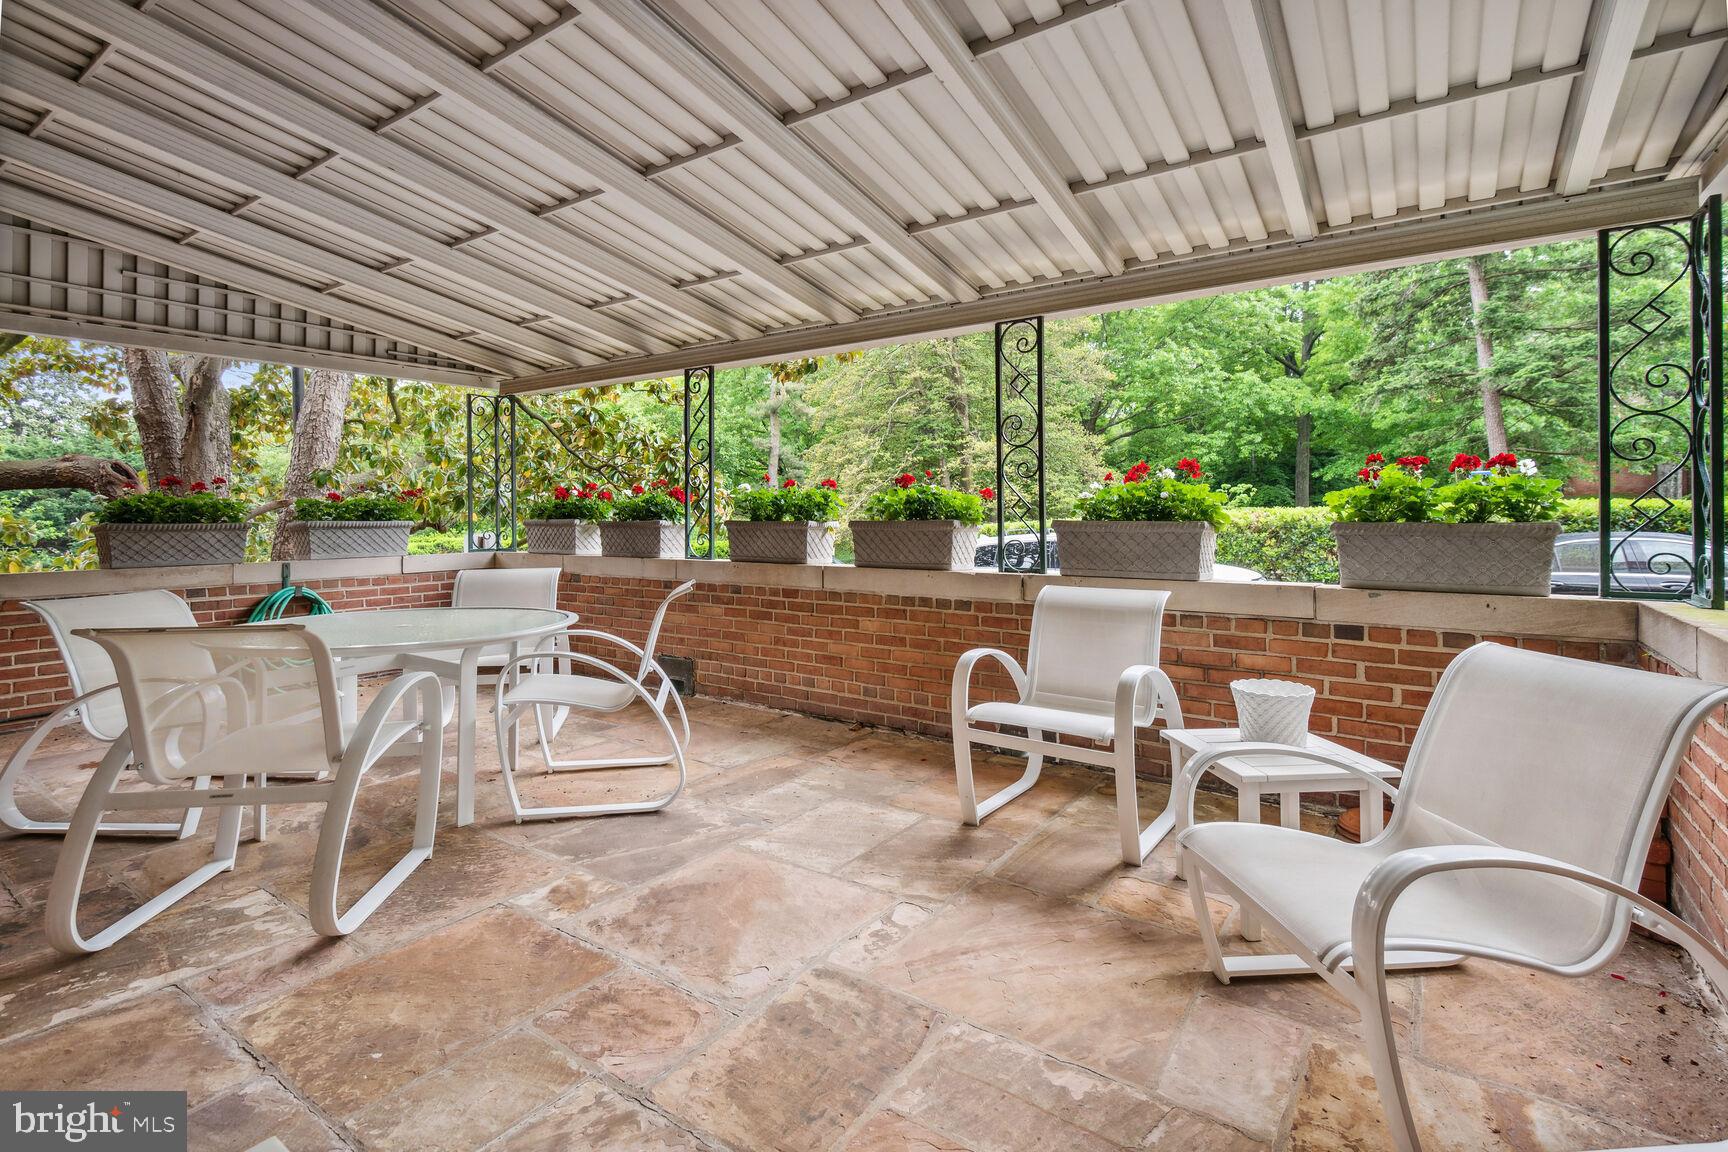 a view of a patio with chairs and backyard